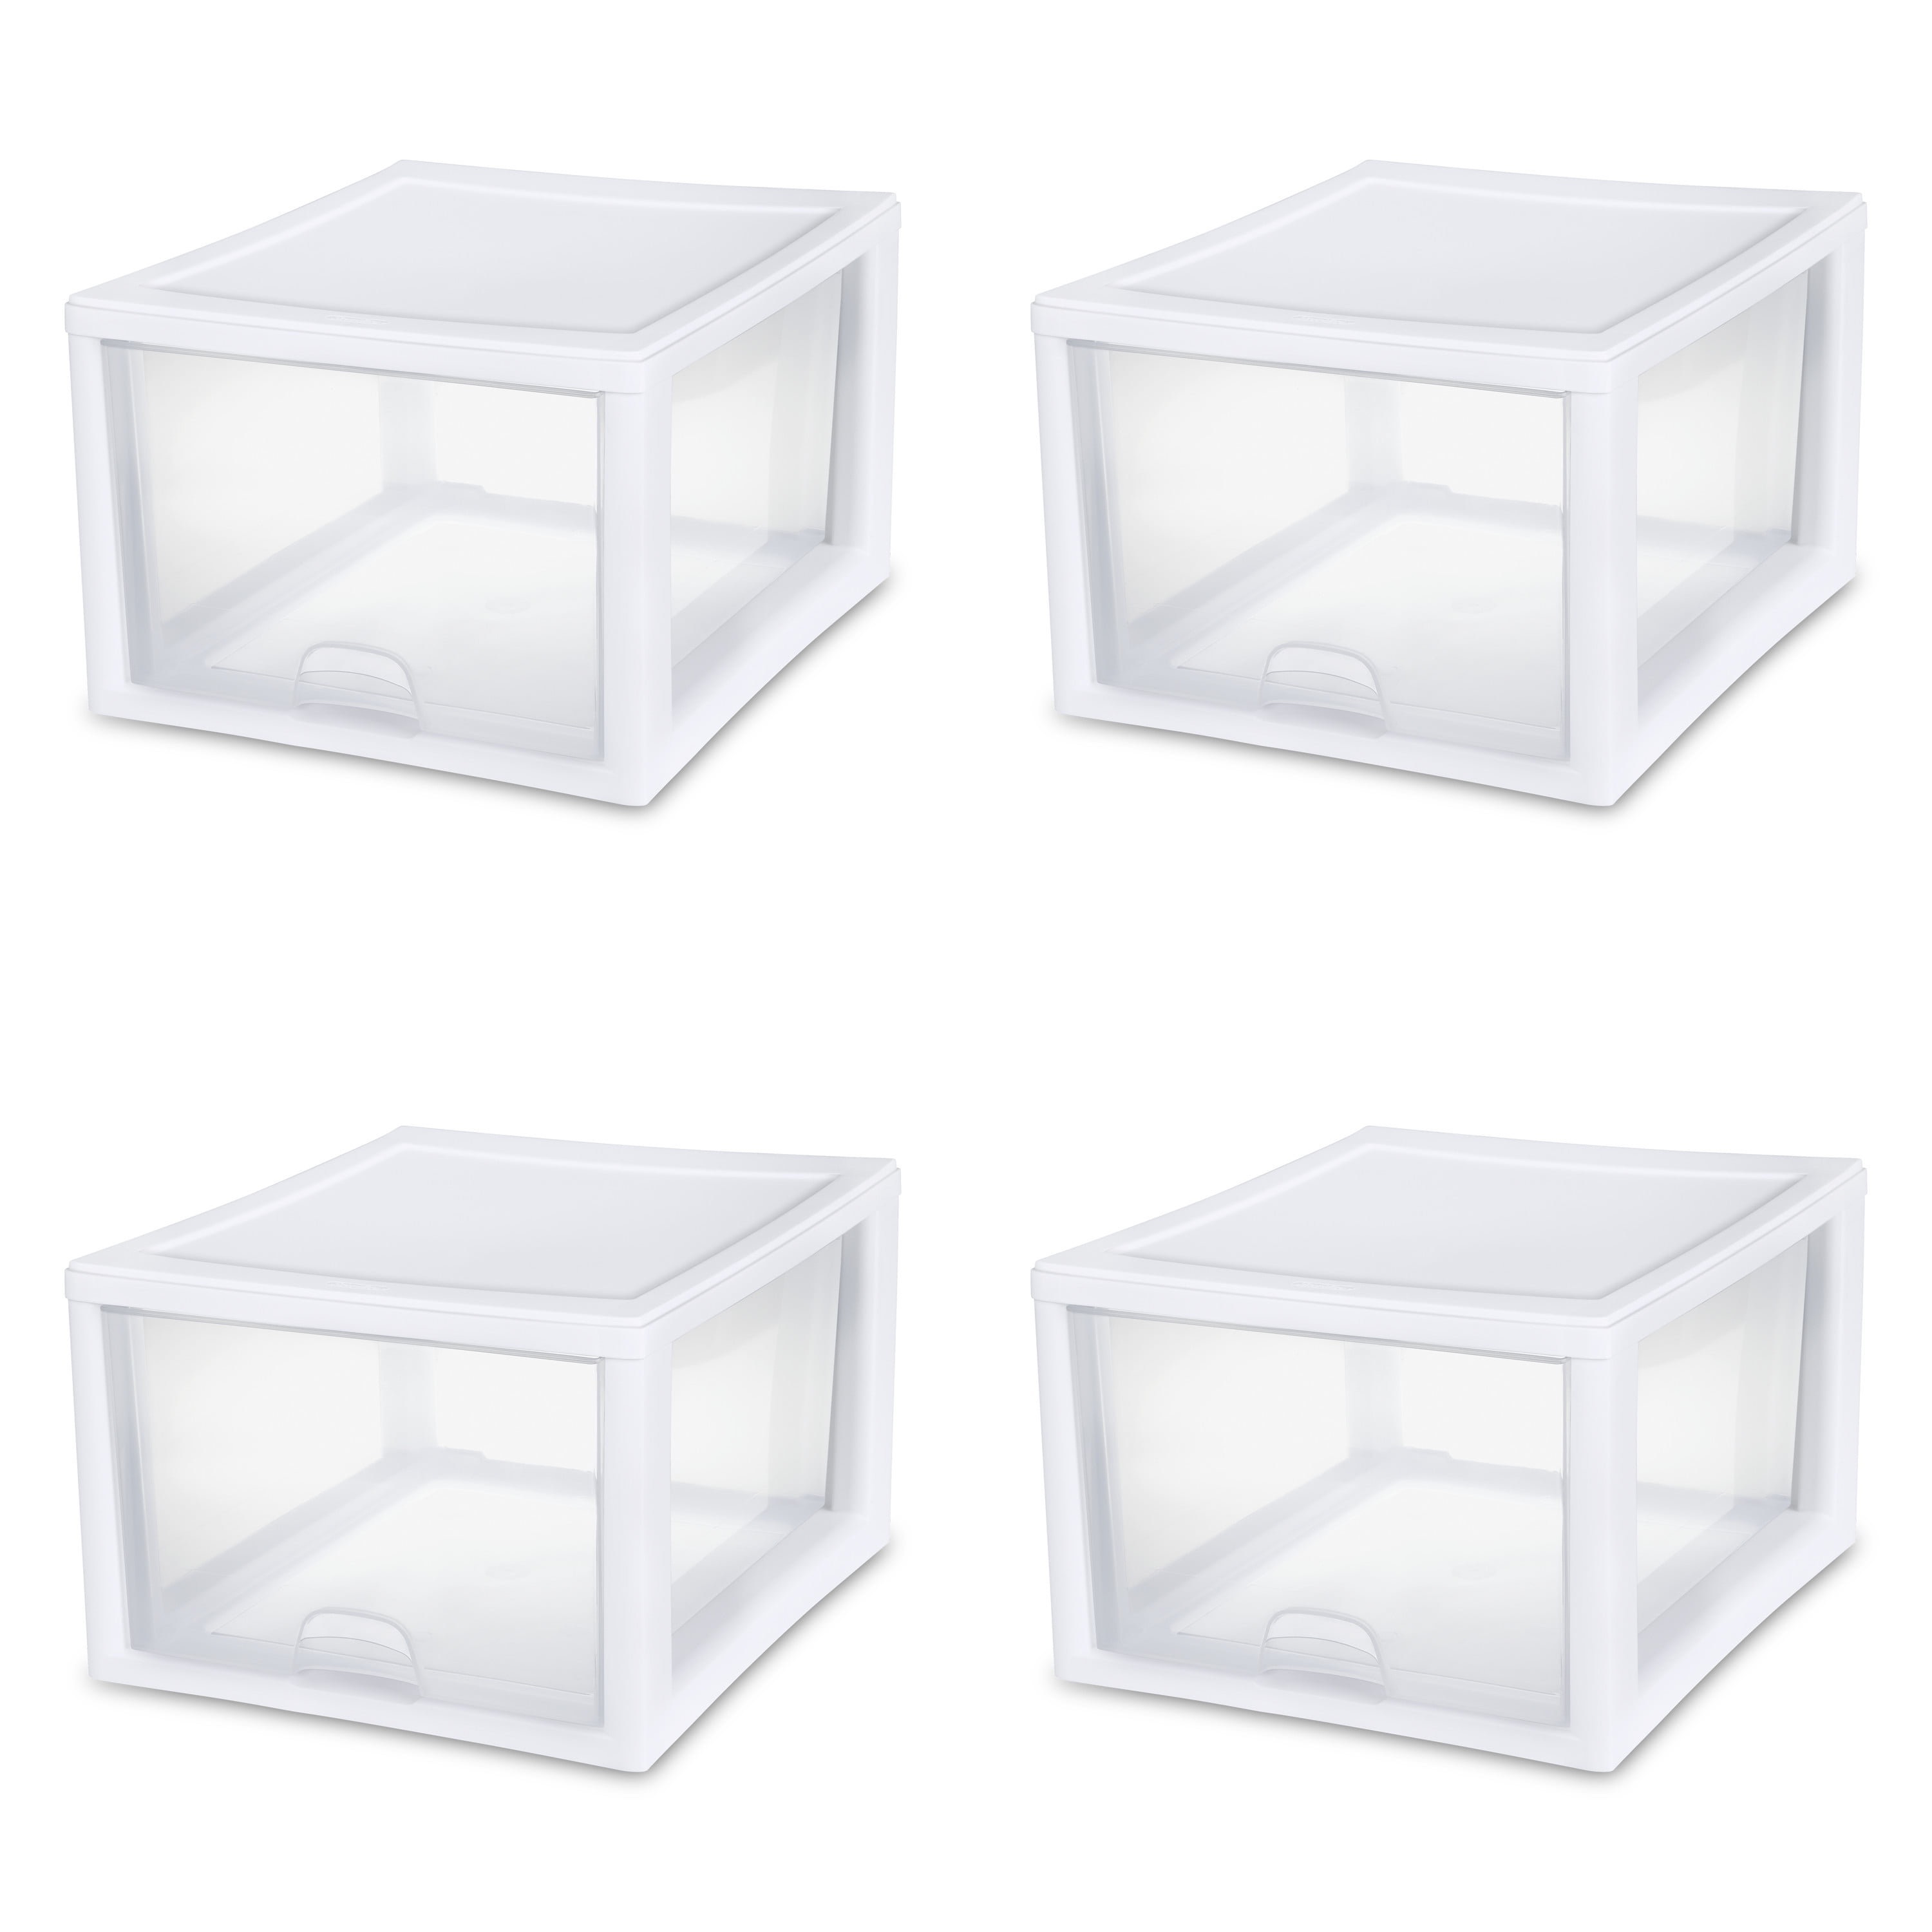 Sterilite 10.25 in. x 10.25 in. Clear Stackable Plastic 1-Drawer